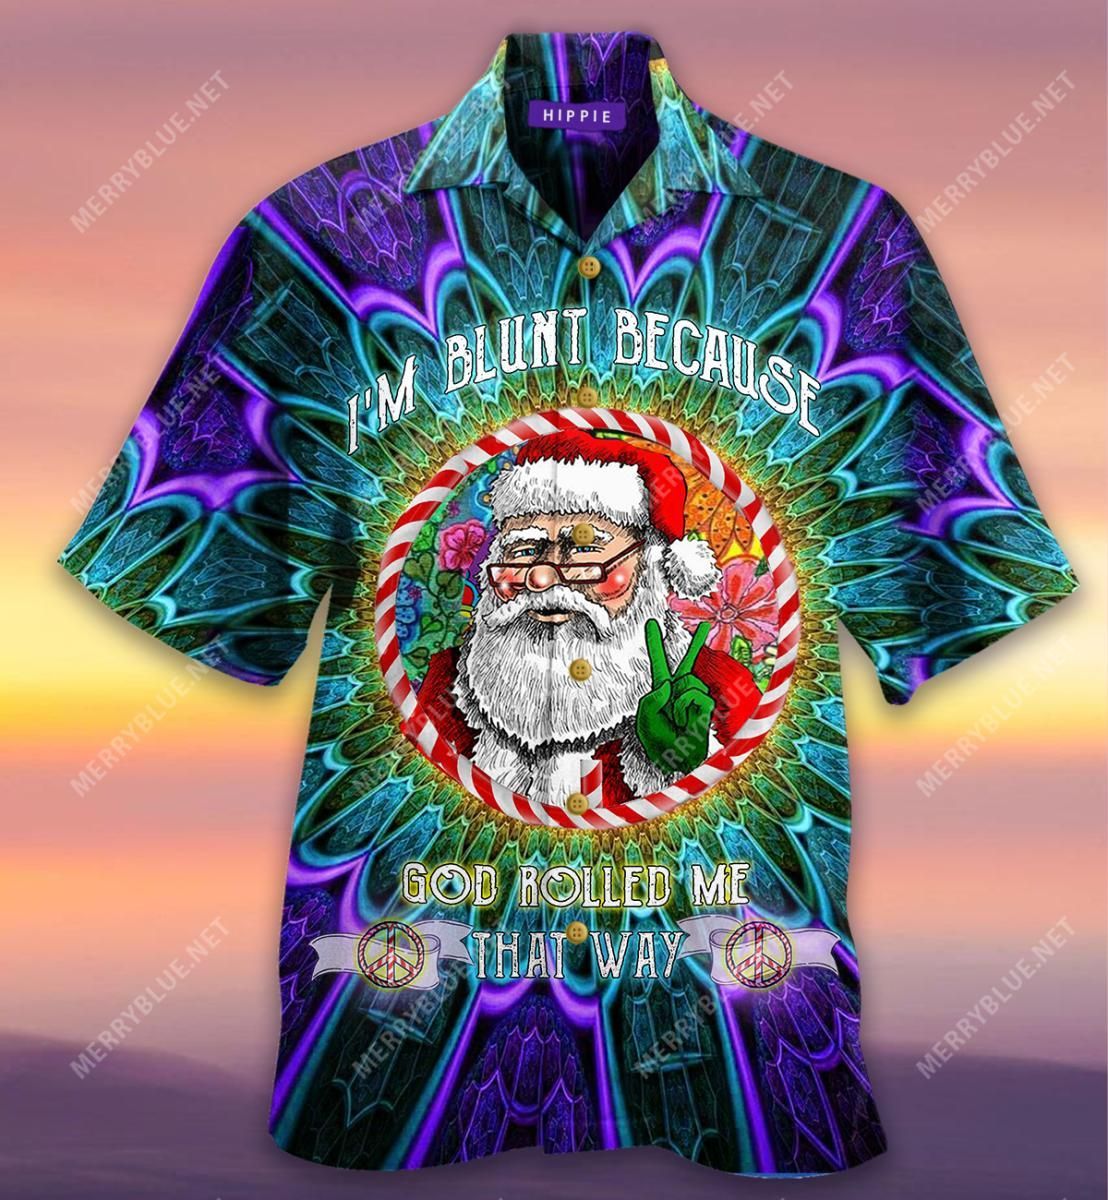 im blunt because god rolled me that way aloha hawaiian shirt colorful short sleeve summer beach casual shirt for men and women tmcpo